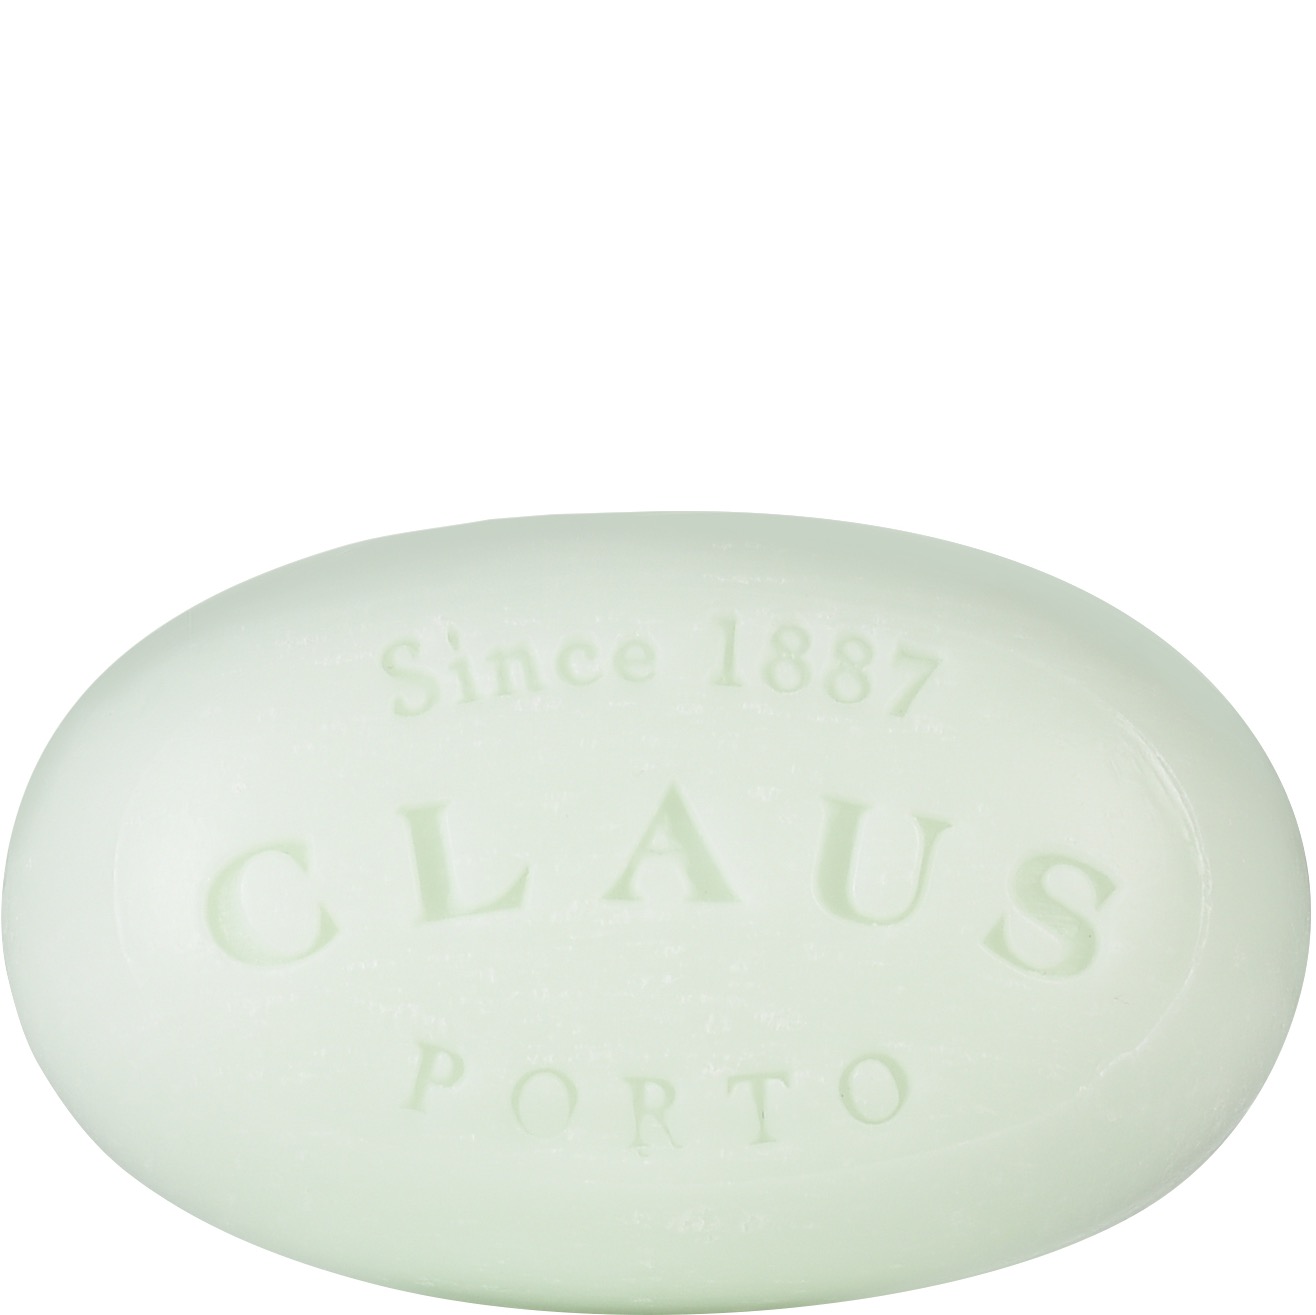 Claus Porto Soap Bar Madrigal Water Lily 150g - 1.2 - CP-SP019